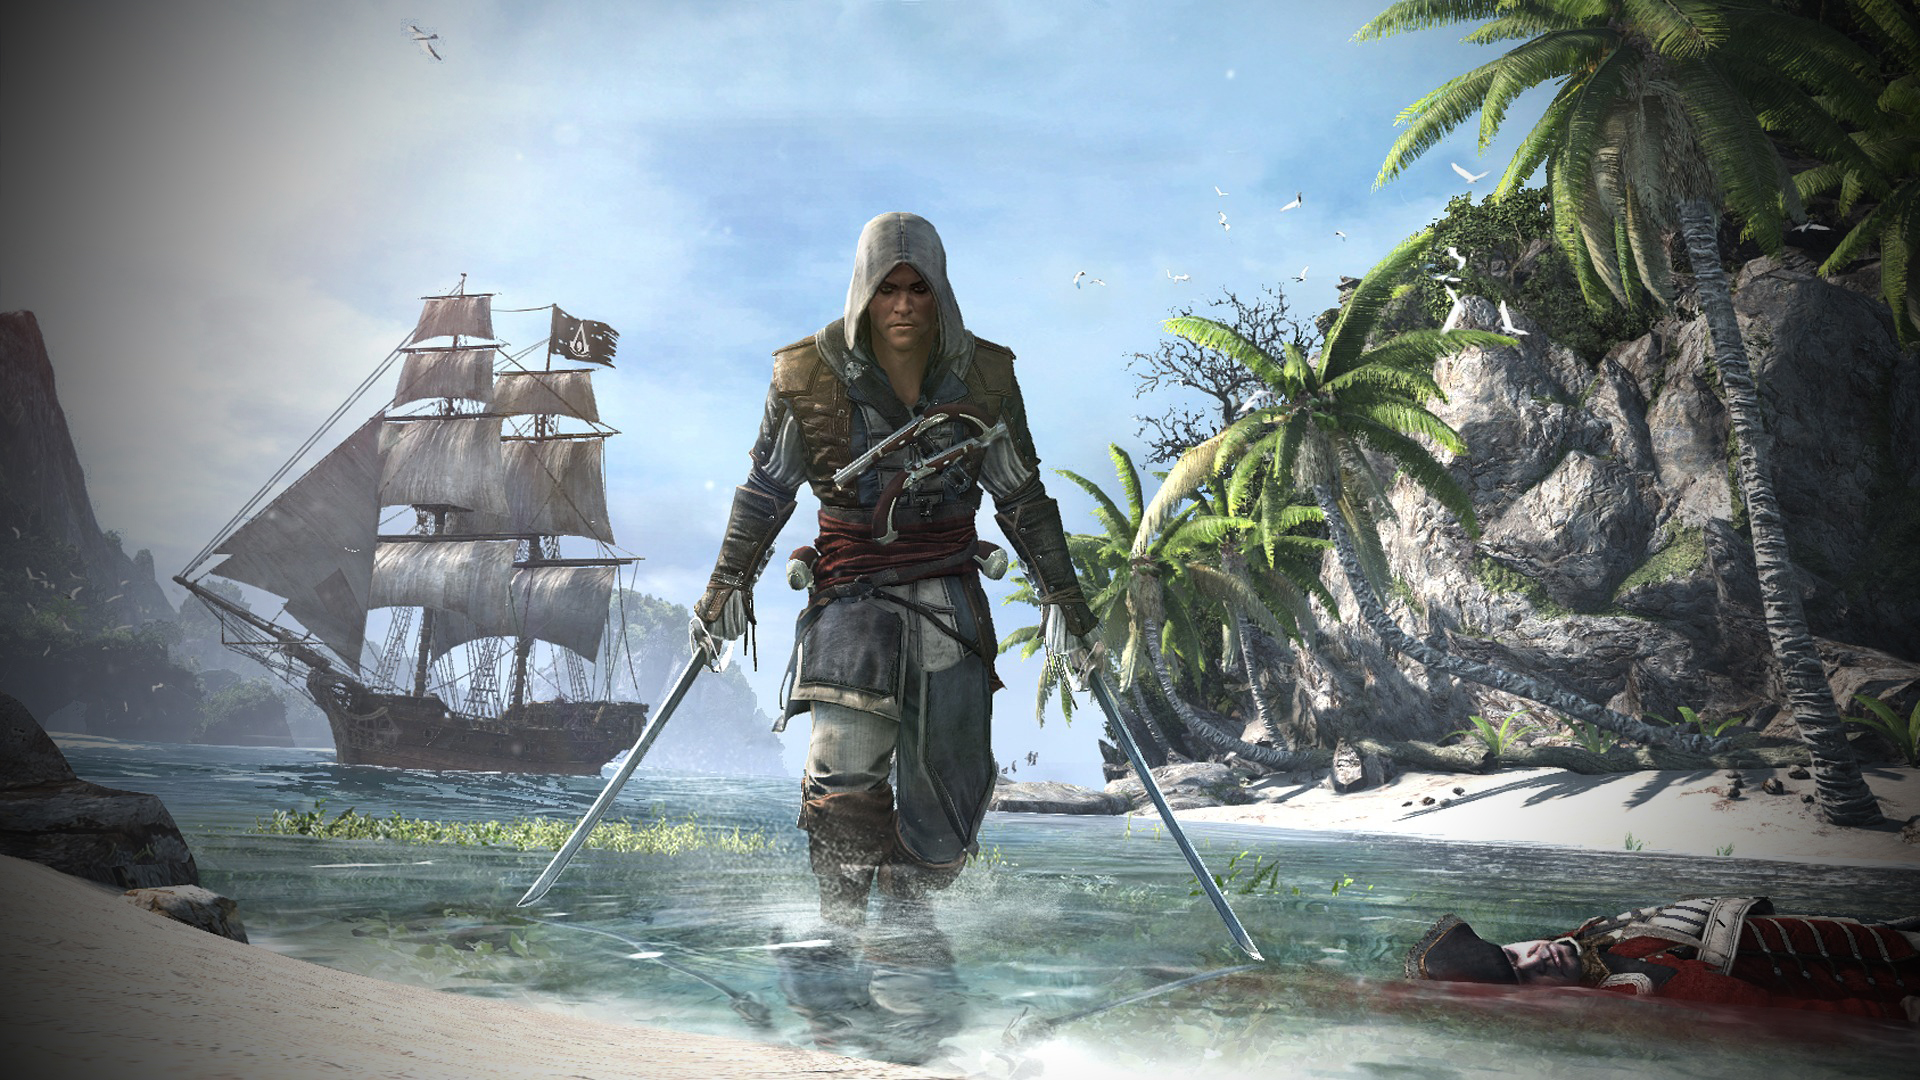 black flag wallpaper,action adventure game,adventure game,pc game,cg artwork,fictional character